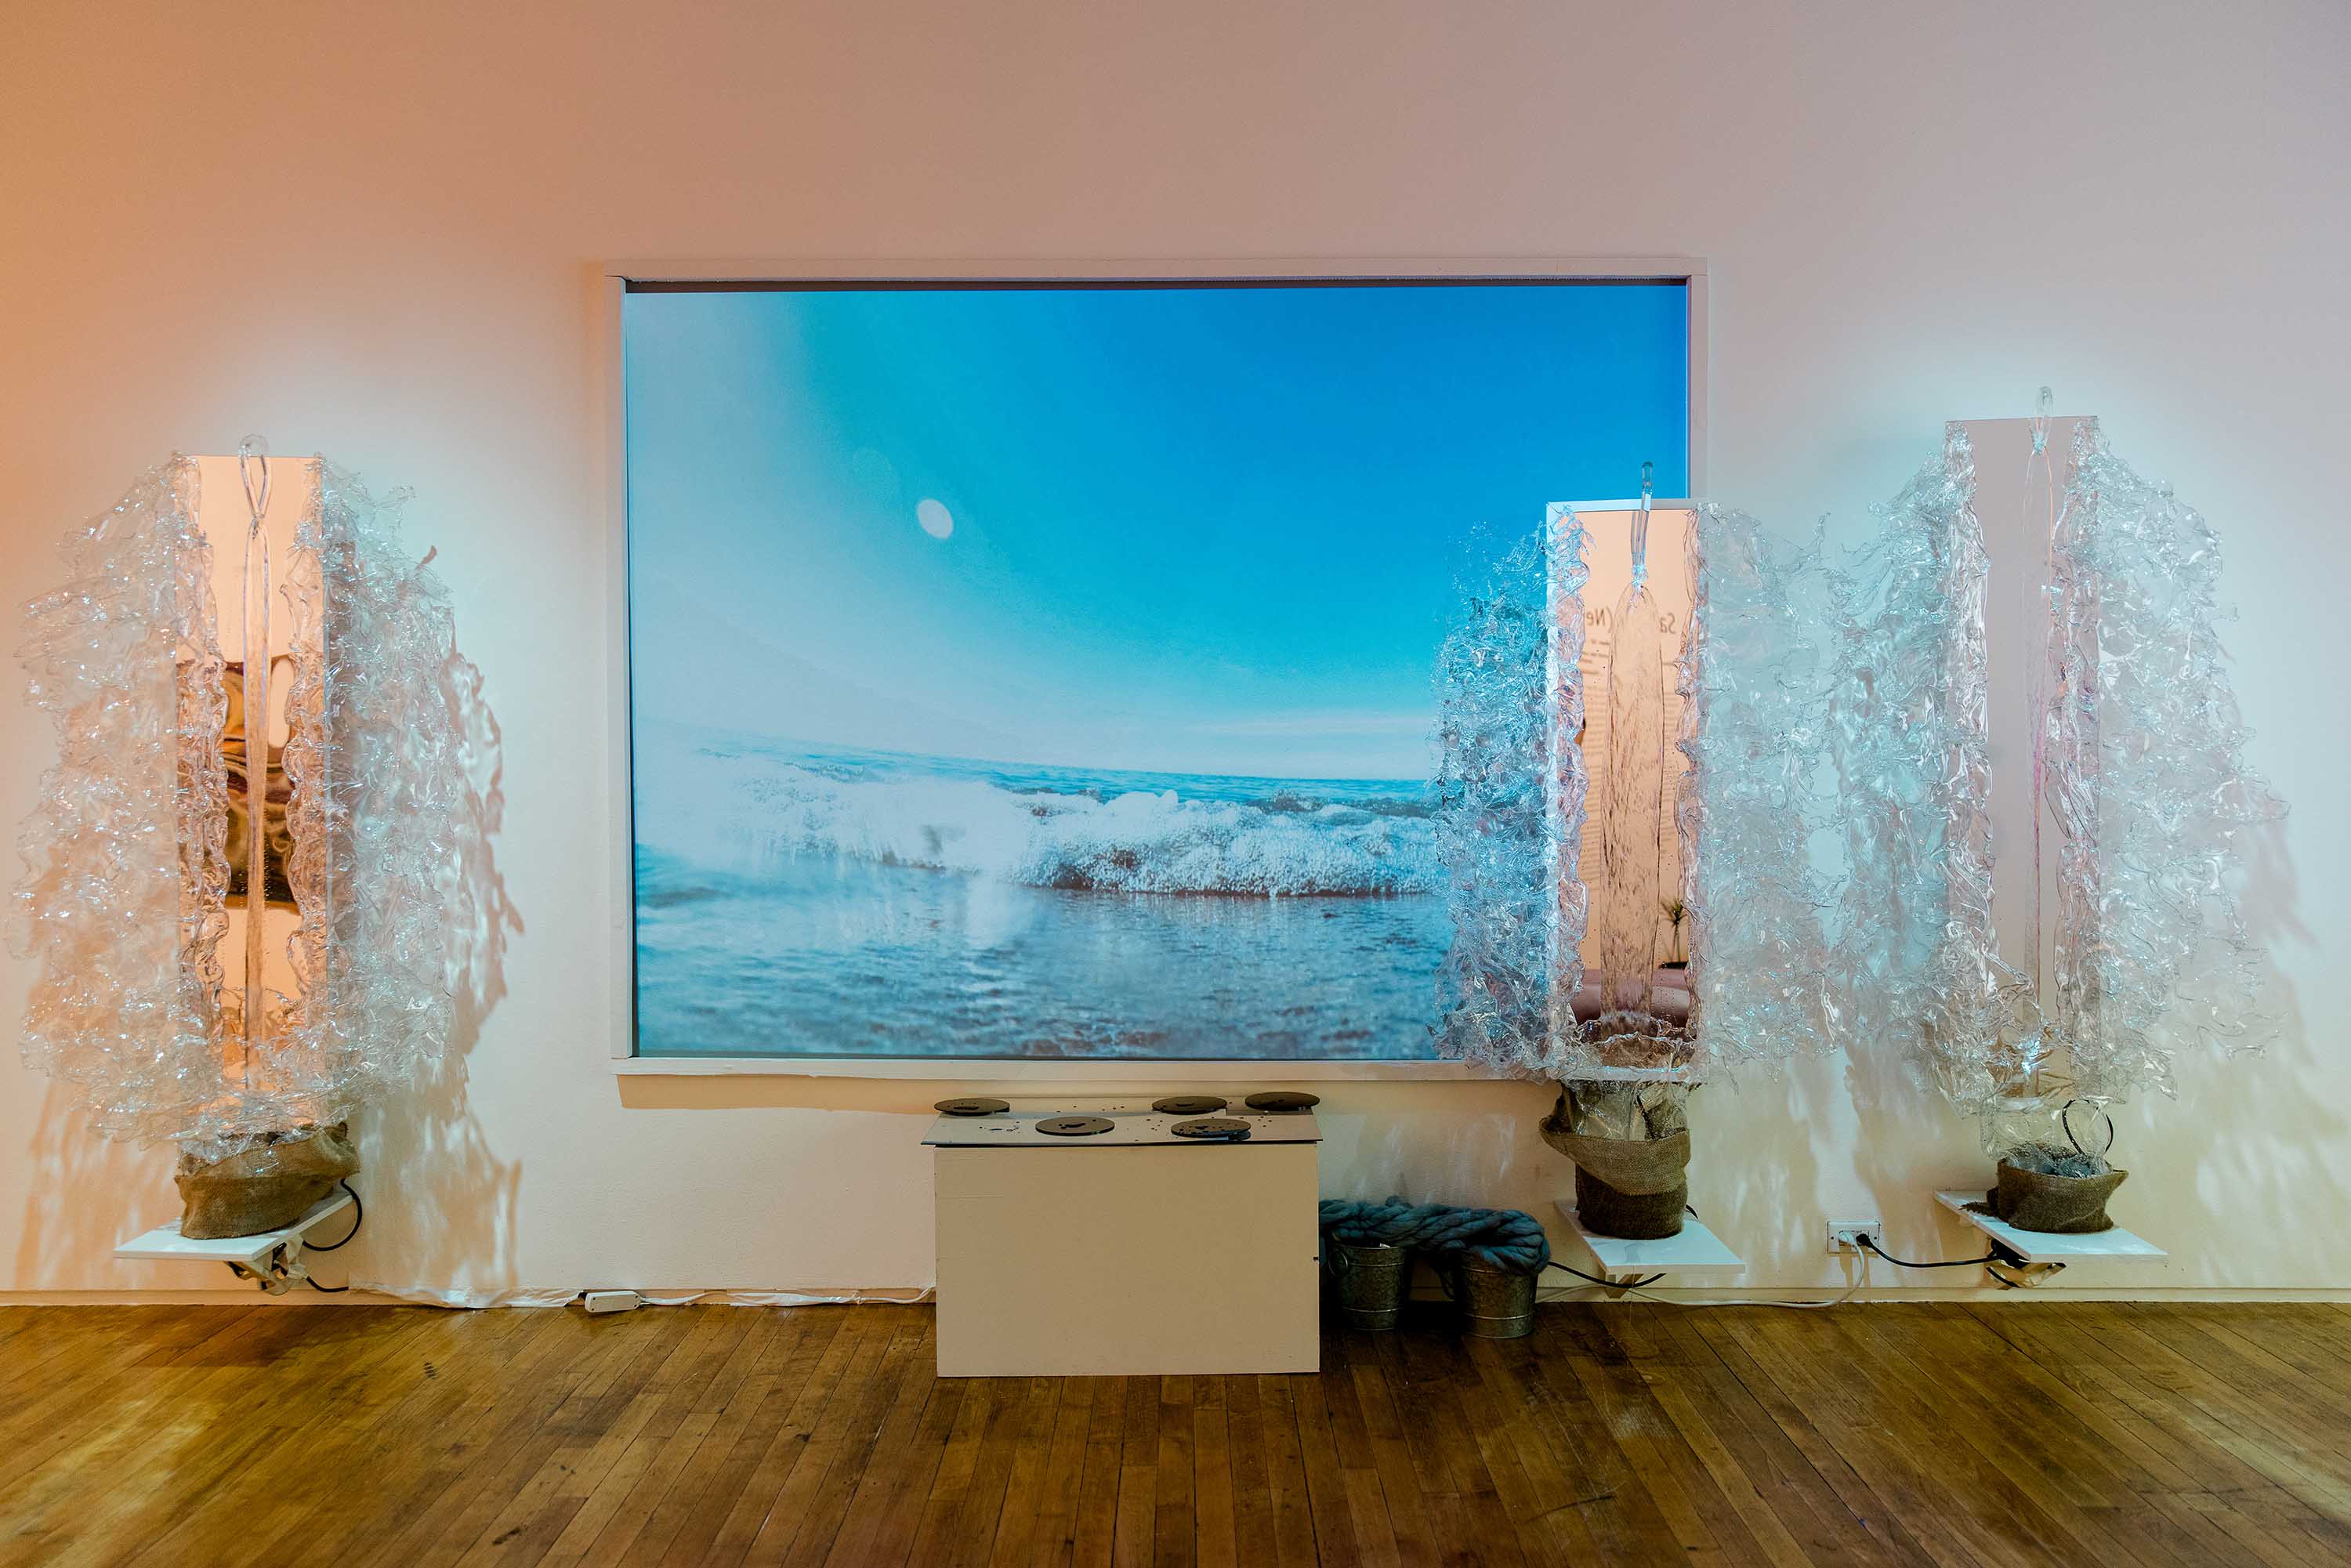 A screen showing a frozen ocean scene, and three sculptures resembling large splashes of water.